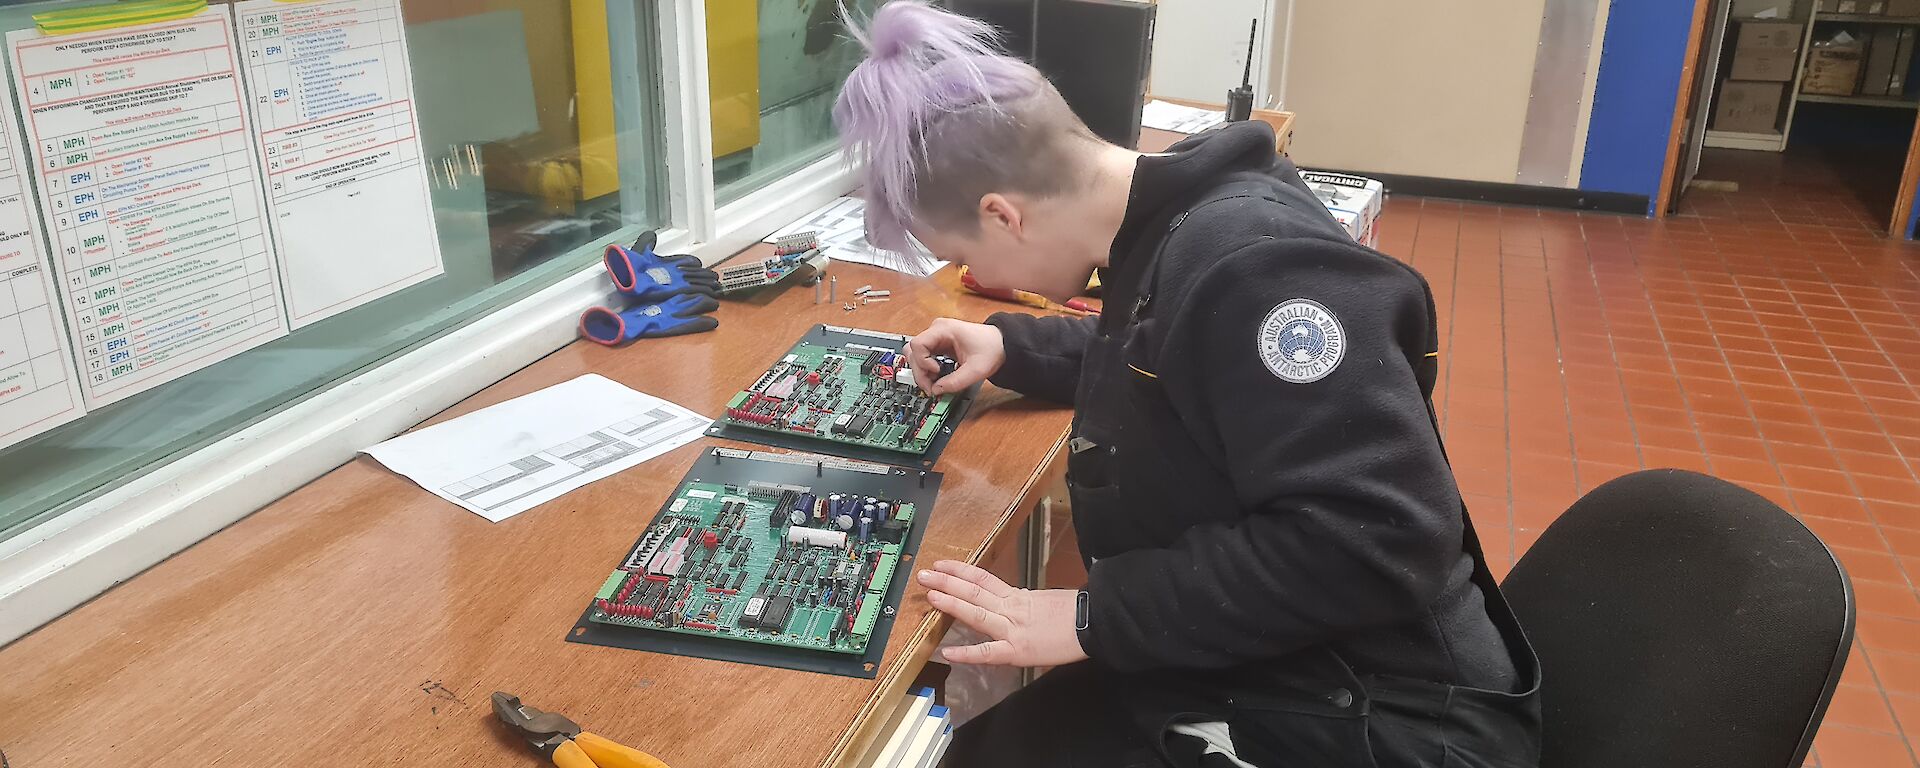 Woman with dyed purple hair sits at desk soldering electronics circuit boards